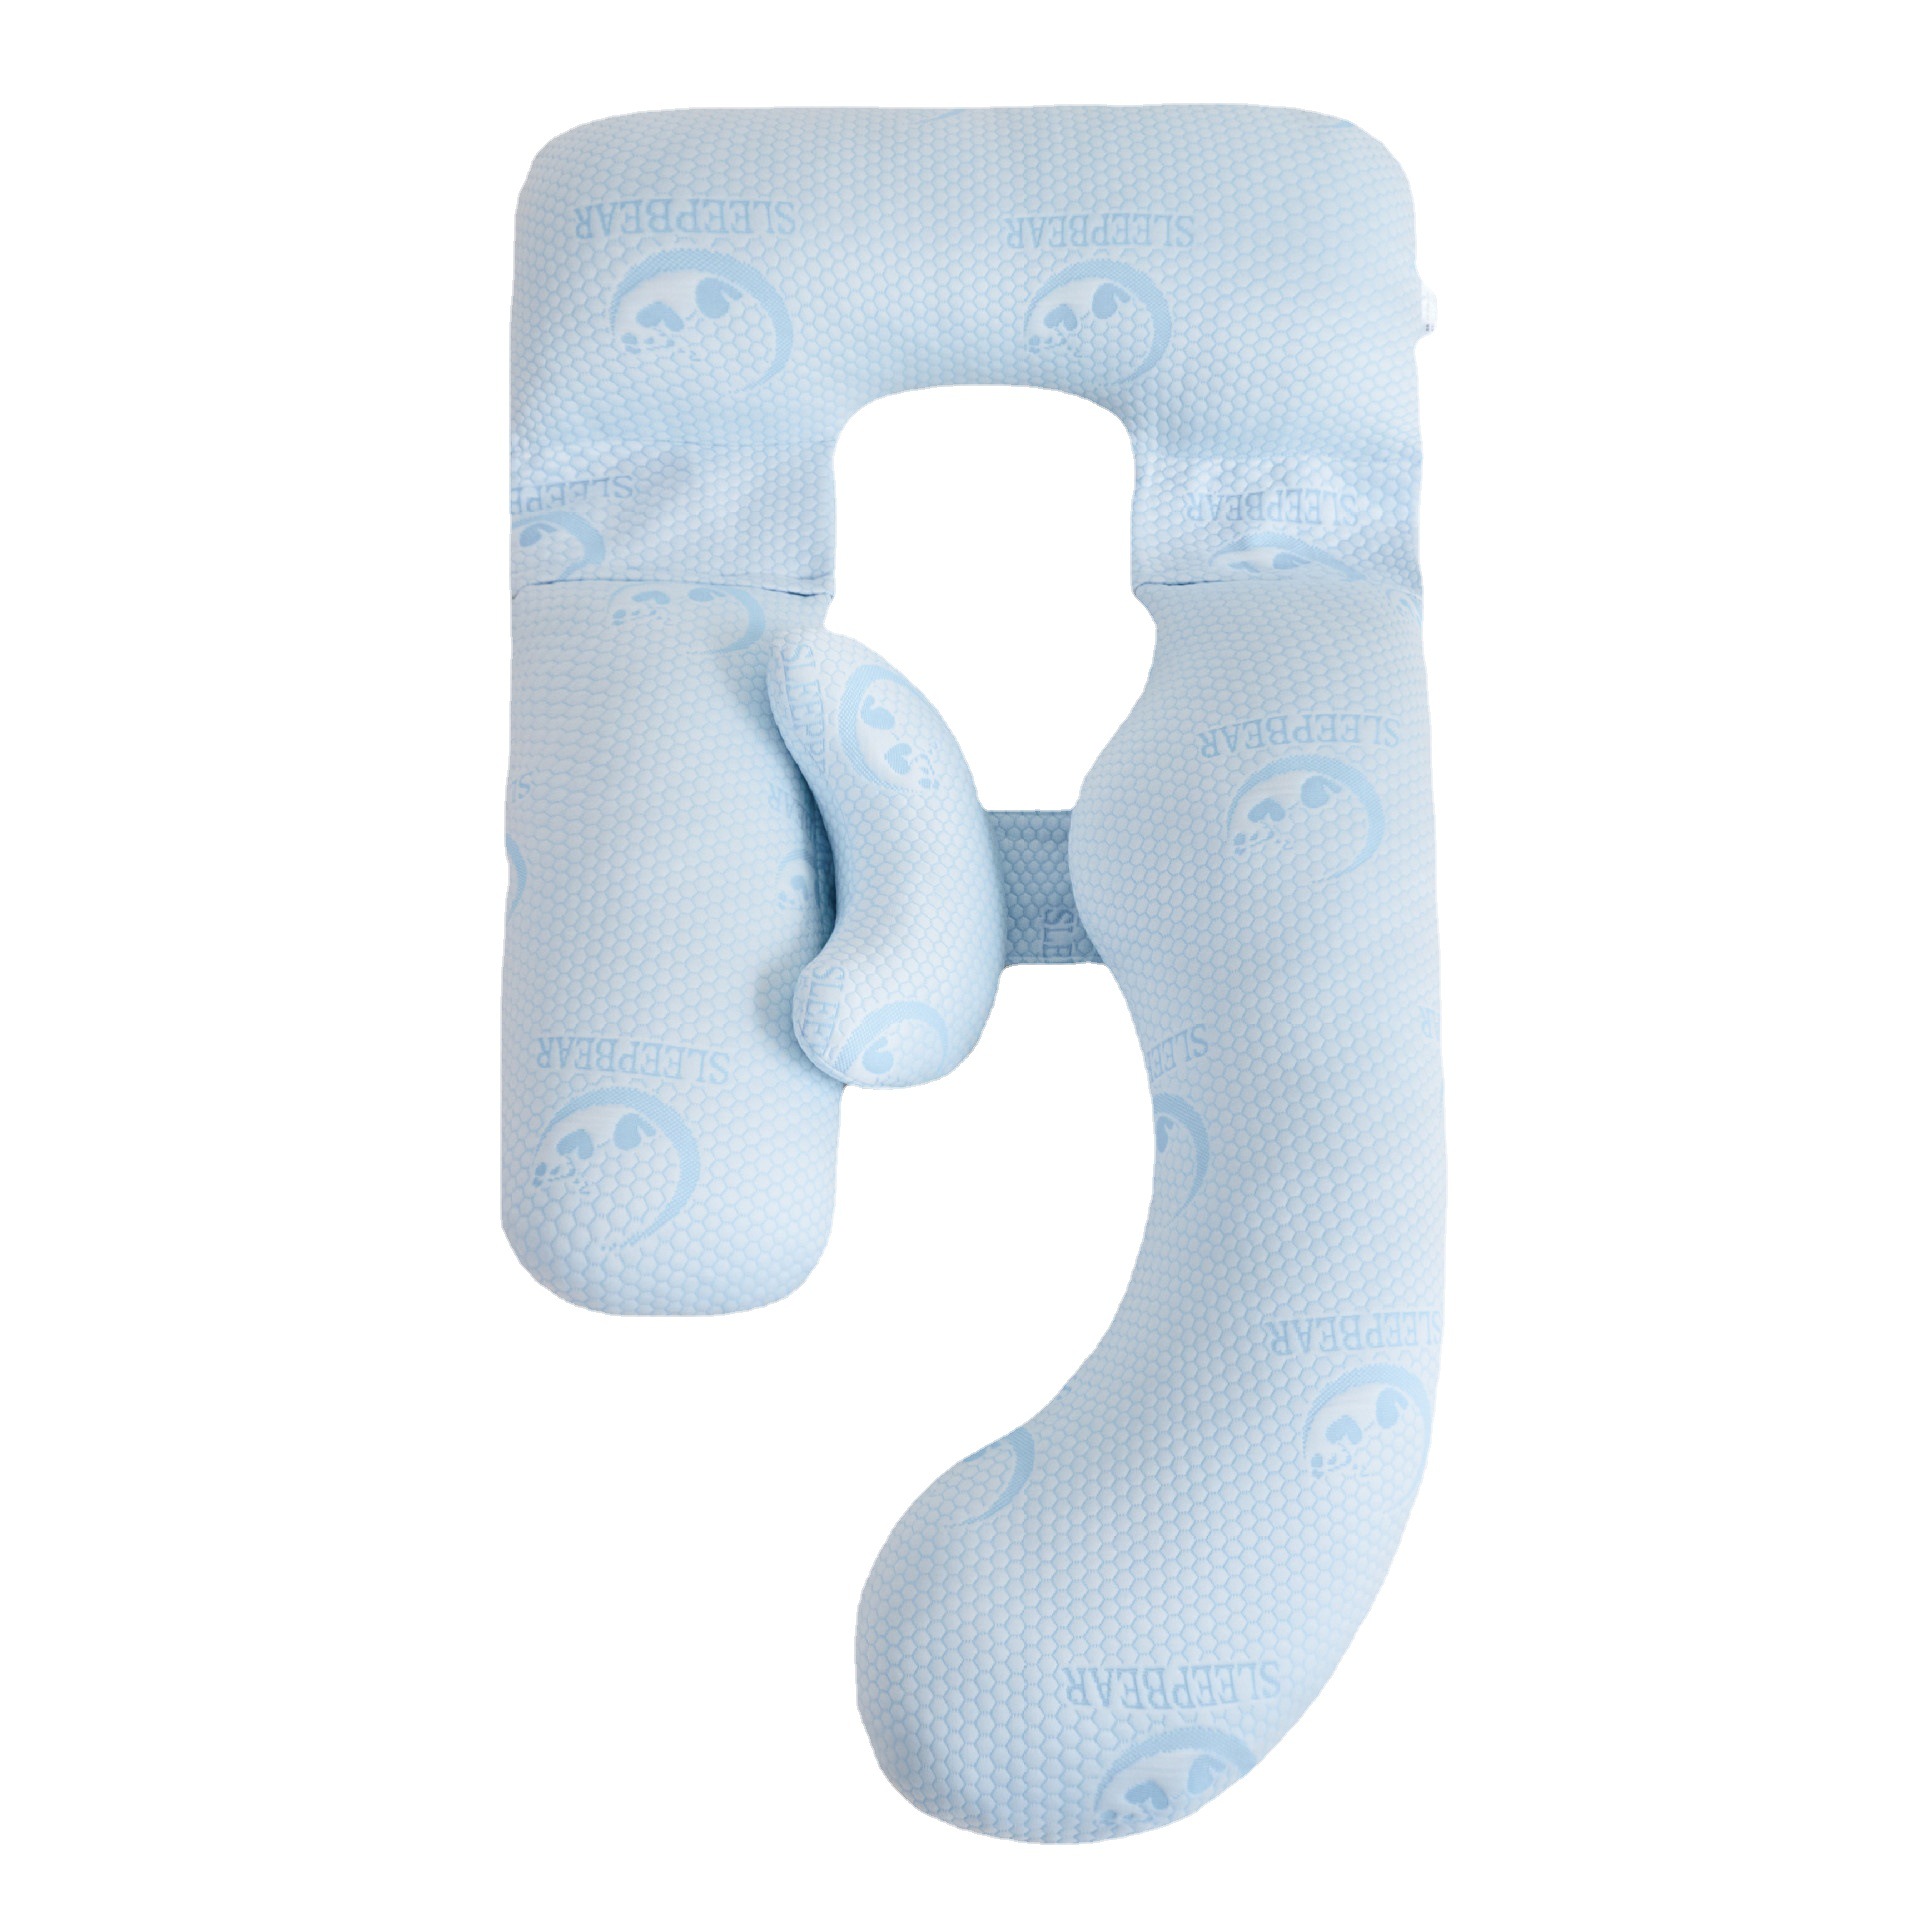 [Customized Processing] Blue Split U-Shaped Pregnancy Pillow Sleeping Belly Support Cushion Pregnancy Supplies Pregnancy Pillow